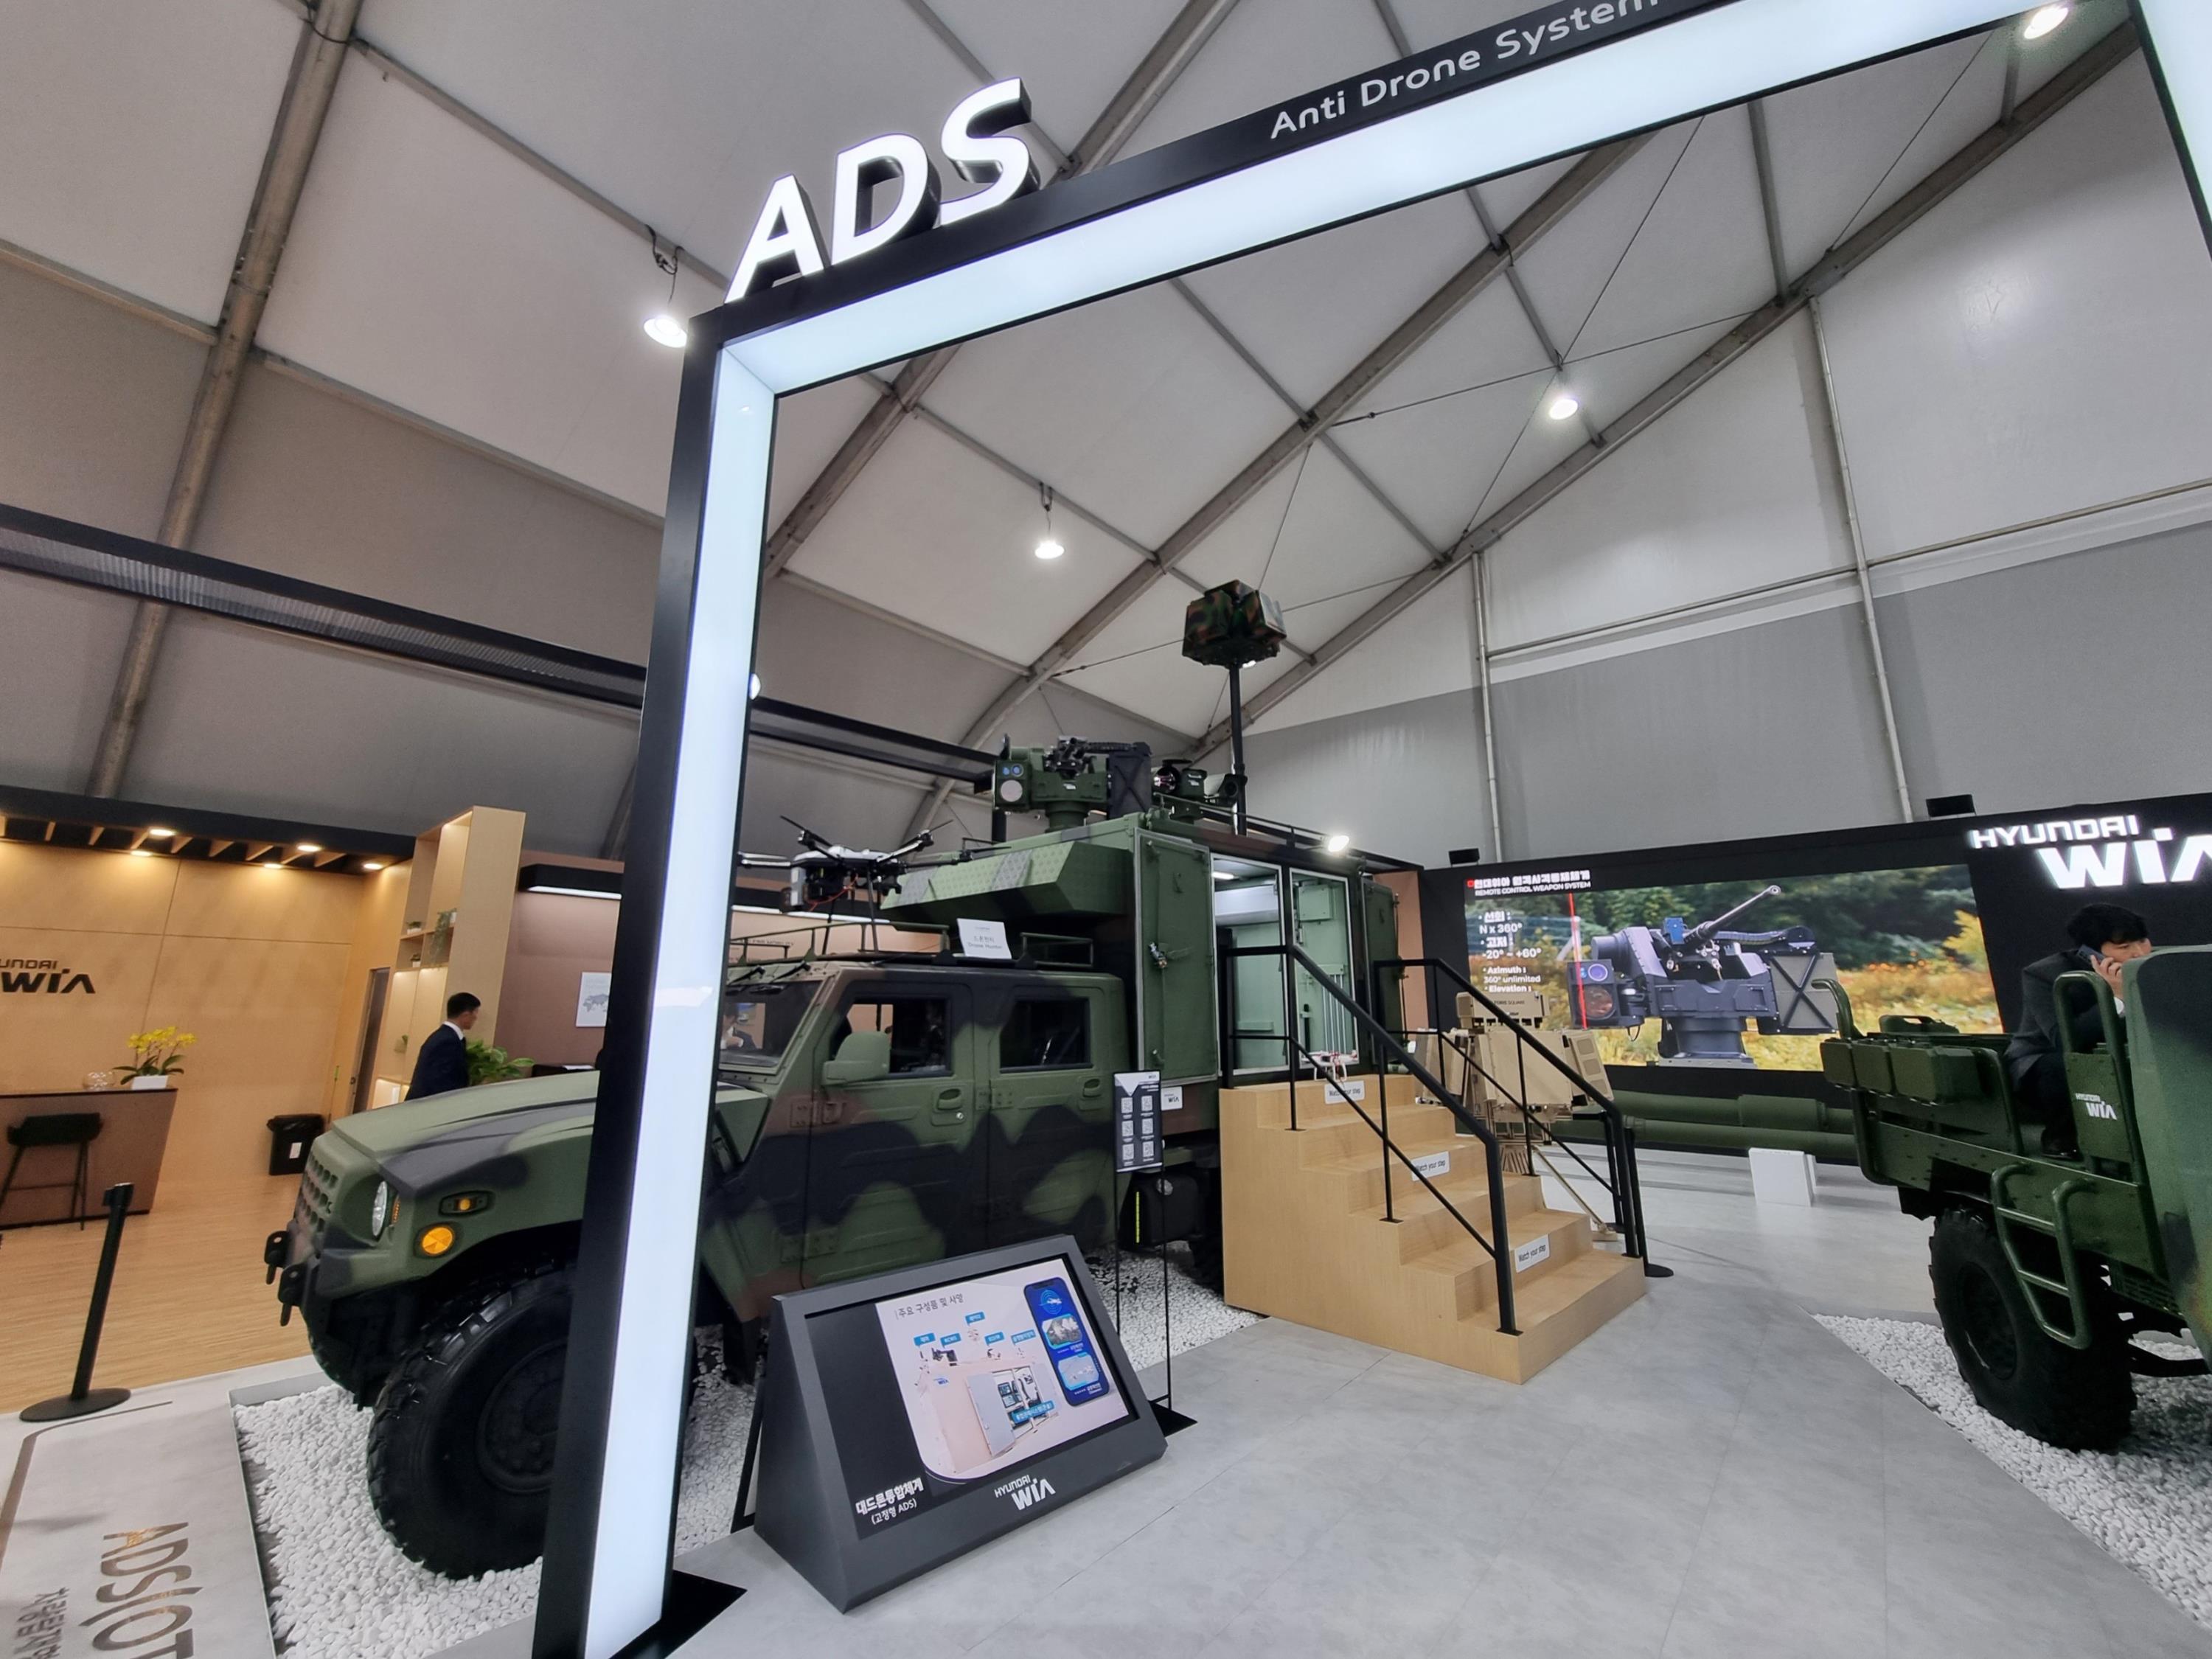 On October 17th, HYUNDAI WIA displayed ‘Anti Drone System (ADS)’ at the Seoul ADEX 2023, which was held at at the Seoul International Airport in Seongnam-si, Gyeonggi-do. Courtesy of HYUNDAI WIA.